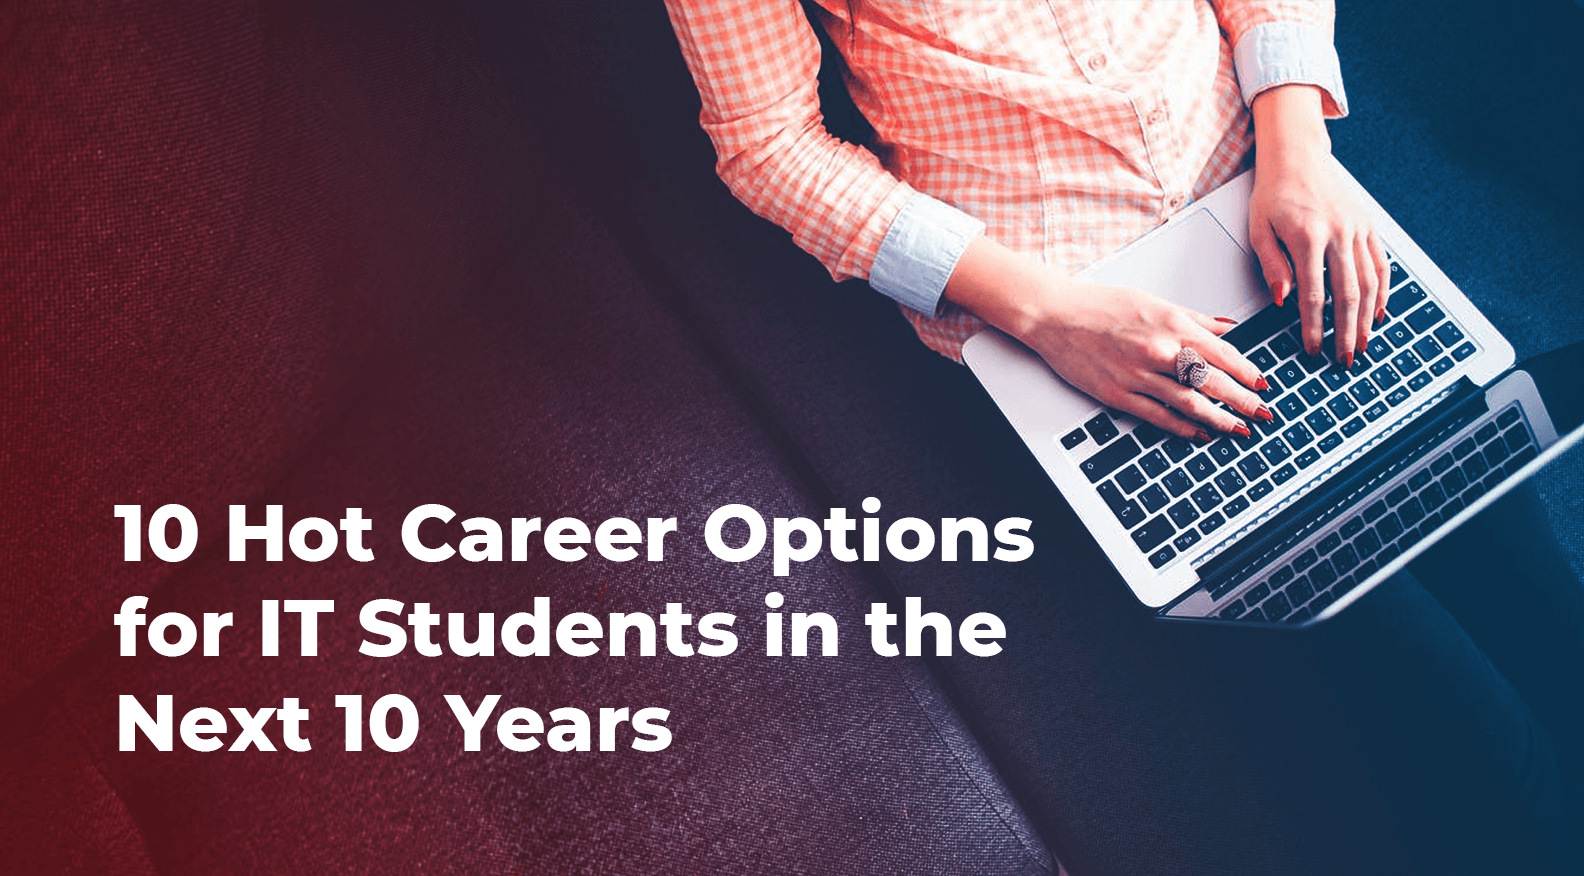 10 Hot Career Options for IT Students in the Next 10 Years